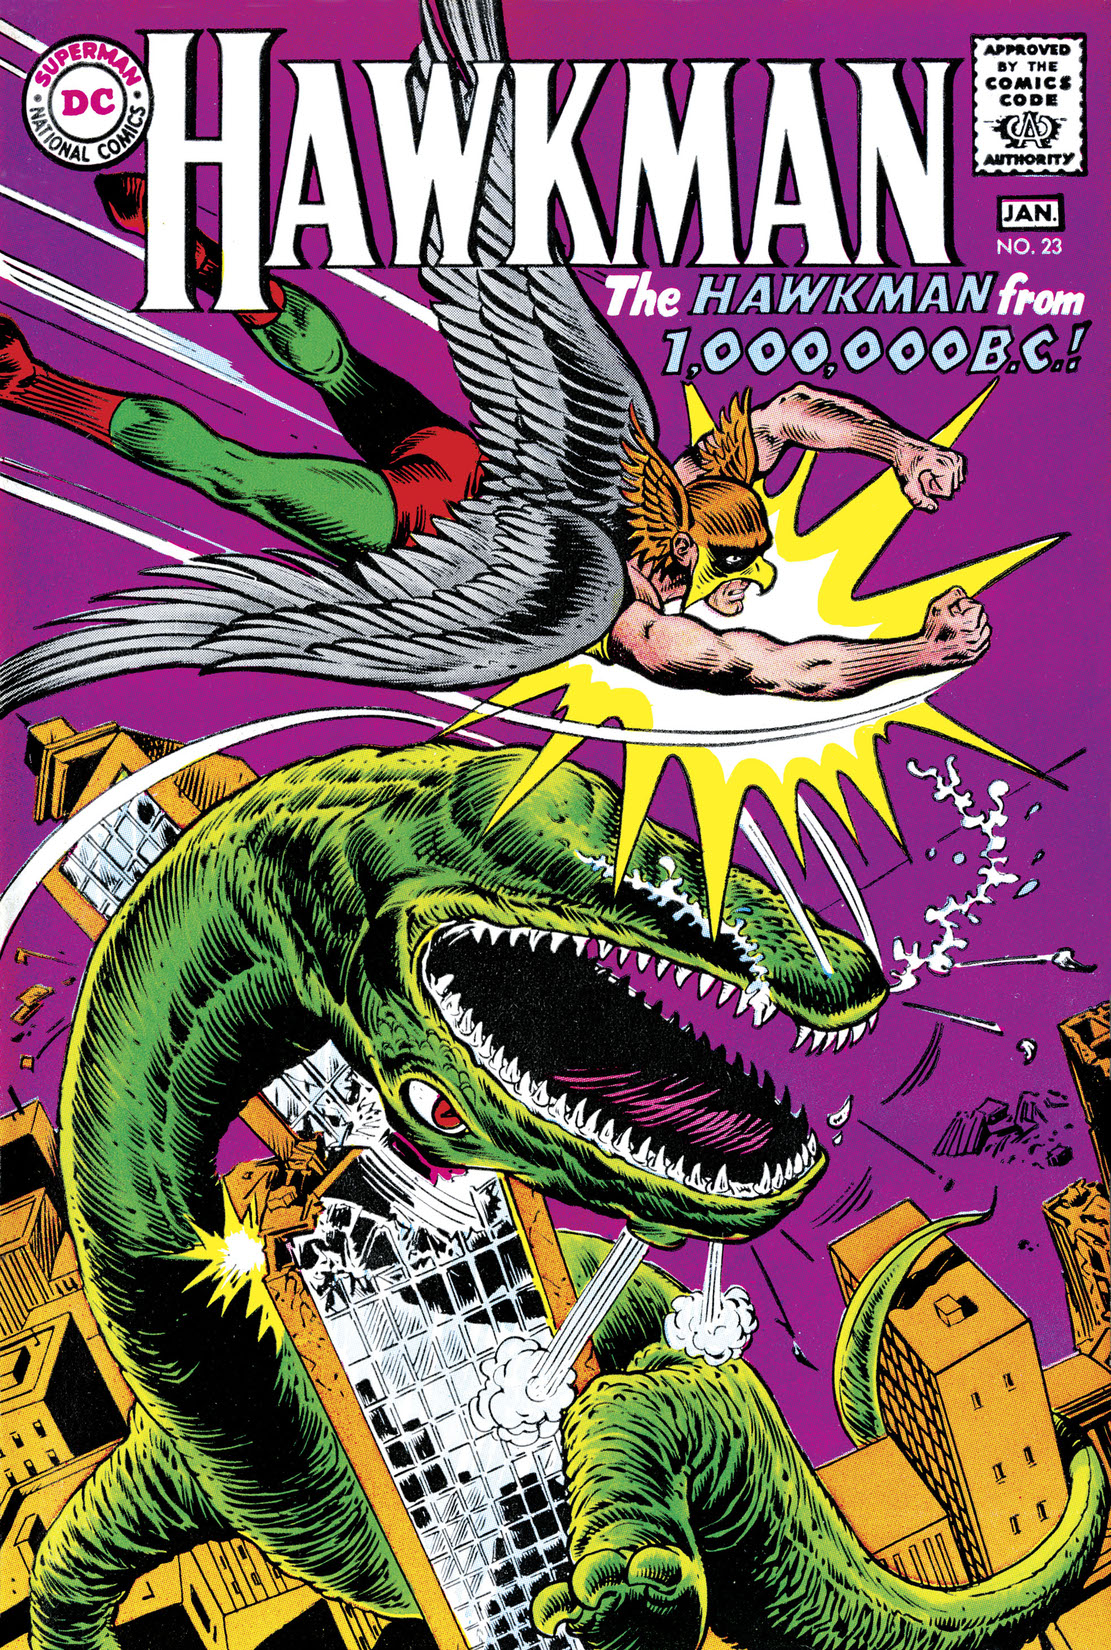 Hawkman (1964-) #23 preview images